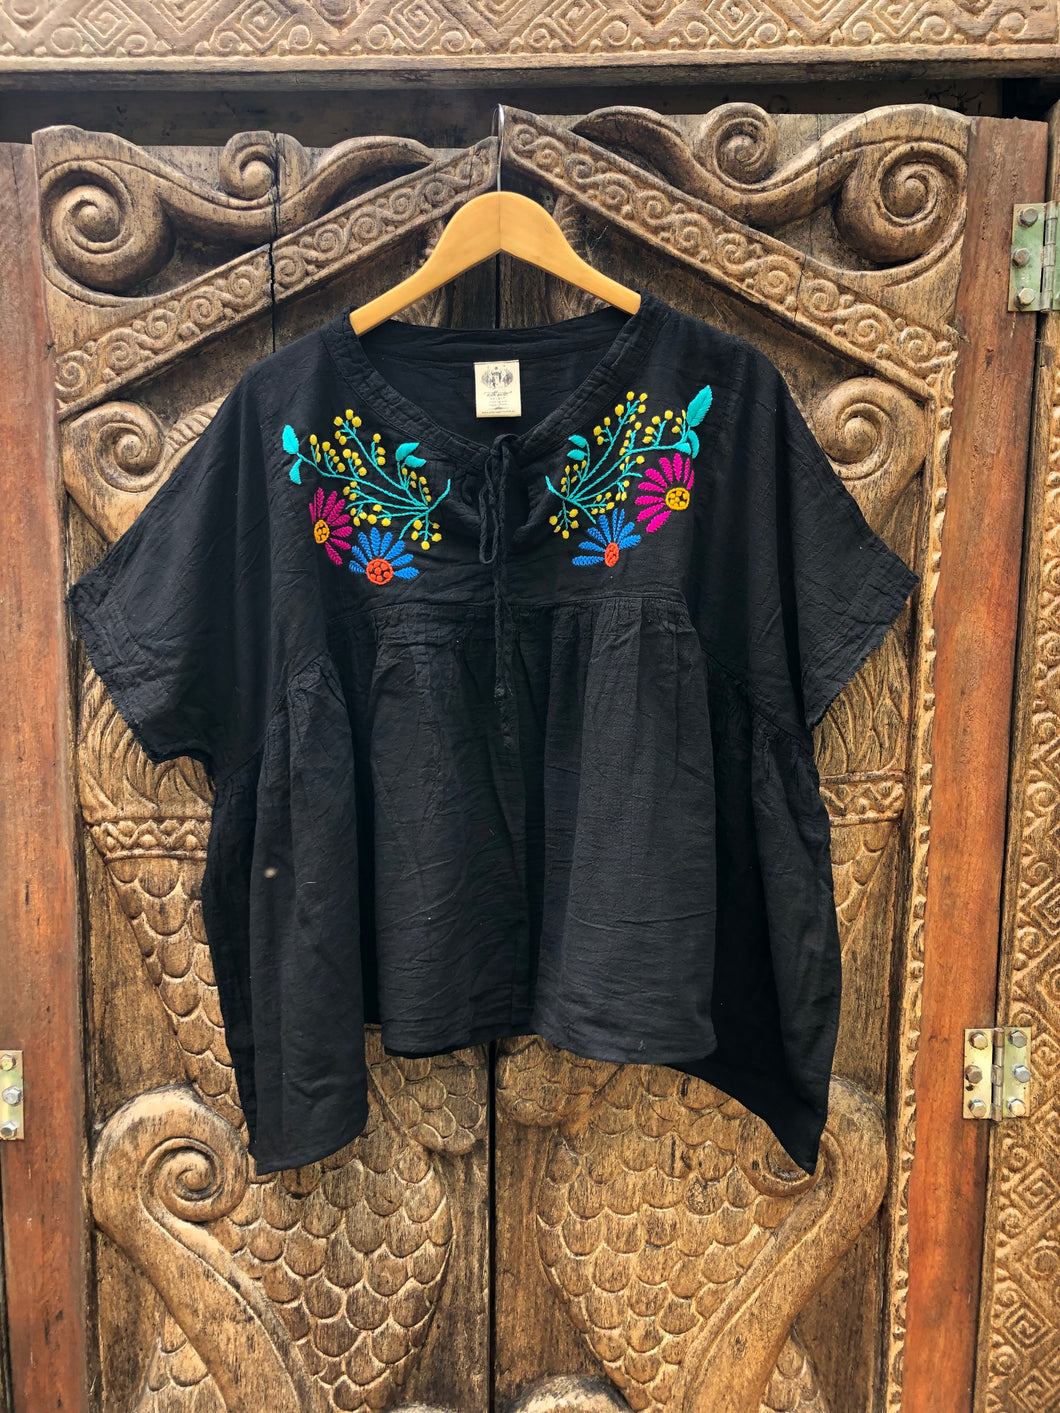 Karuna Blouse - Mexican Fiesta Black with Pink and Blue Petals